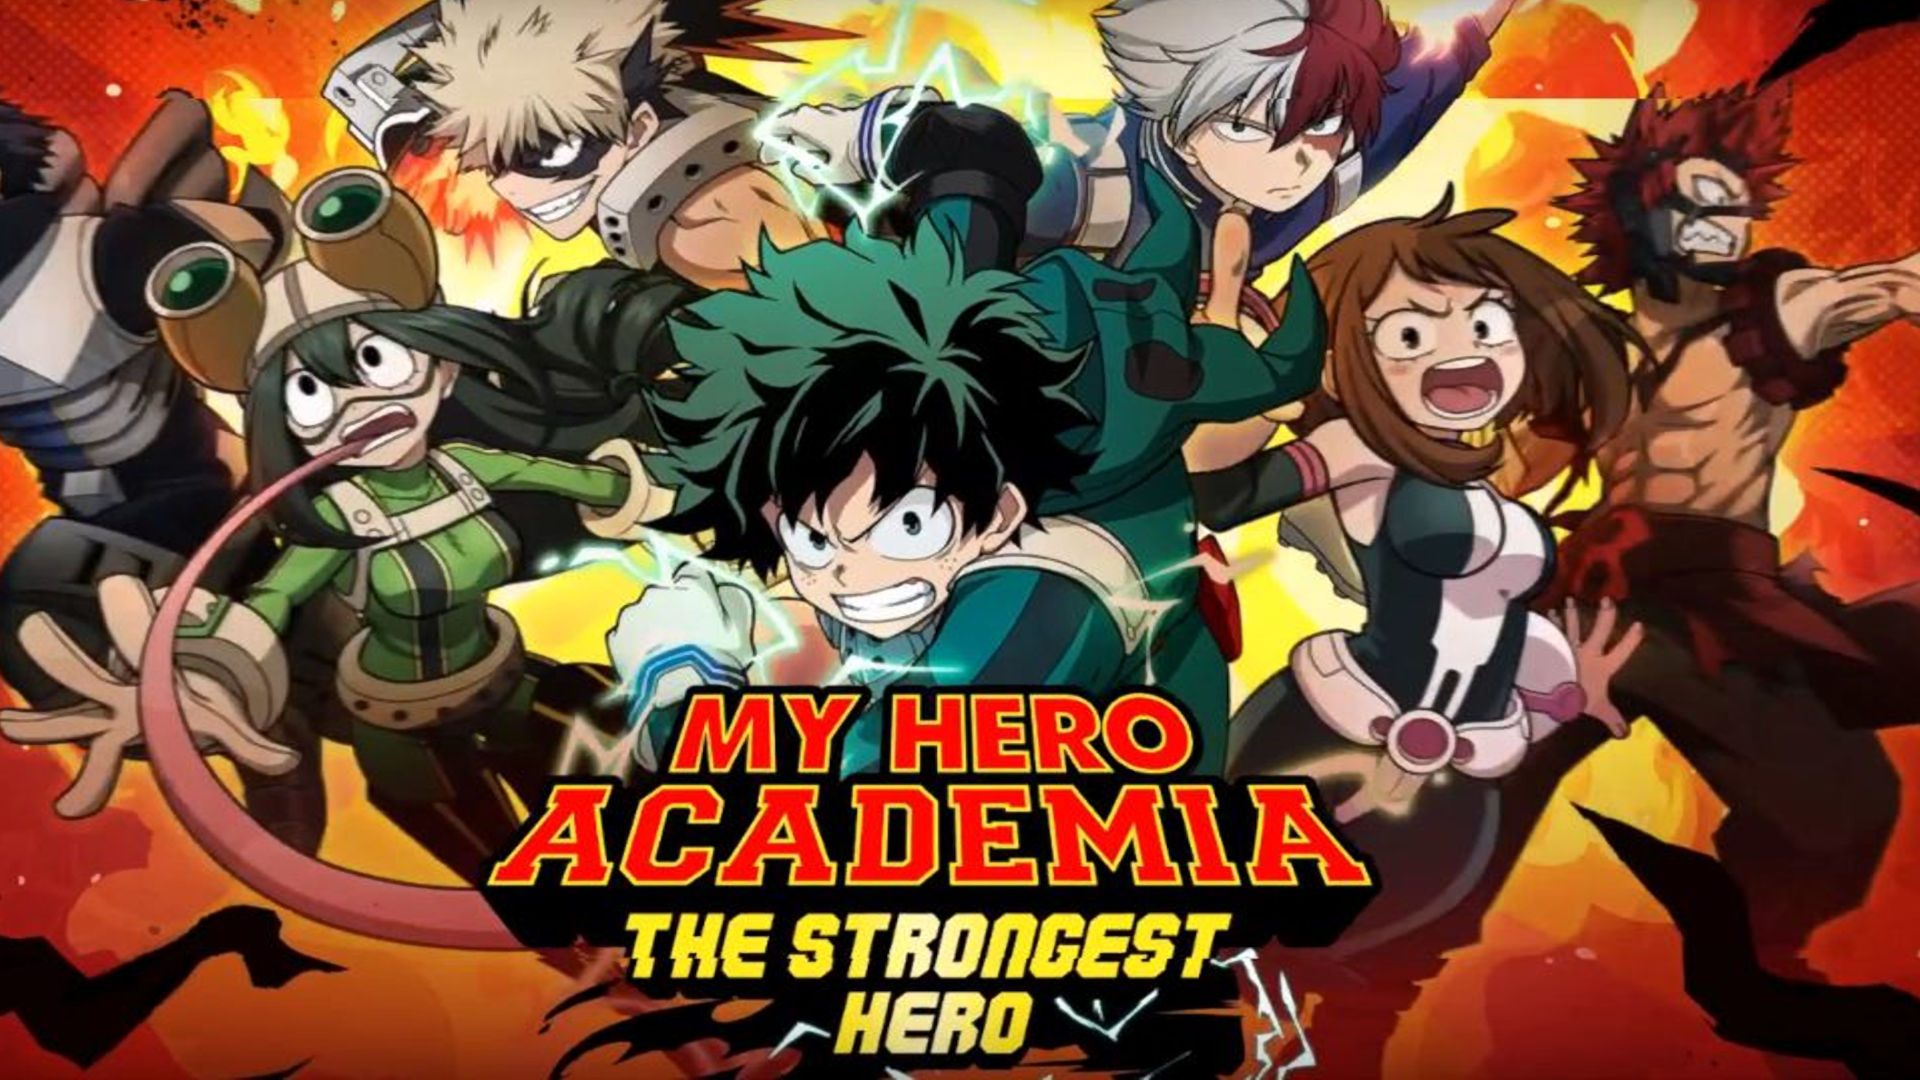 NEW GIFT CODE FOR 1000+ FREE HERO COINS* HOW TO GET IT & REDEEM IT! [NA]  (MHA: The Strongest Hero) 